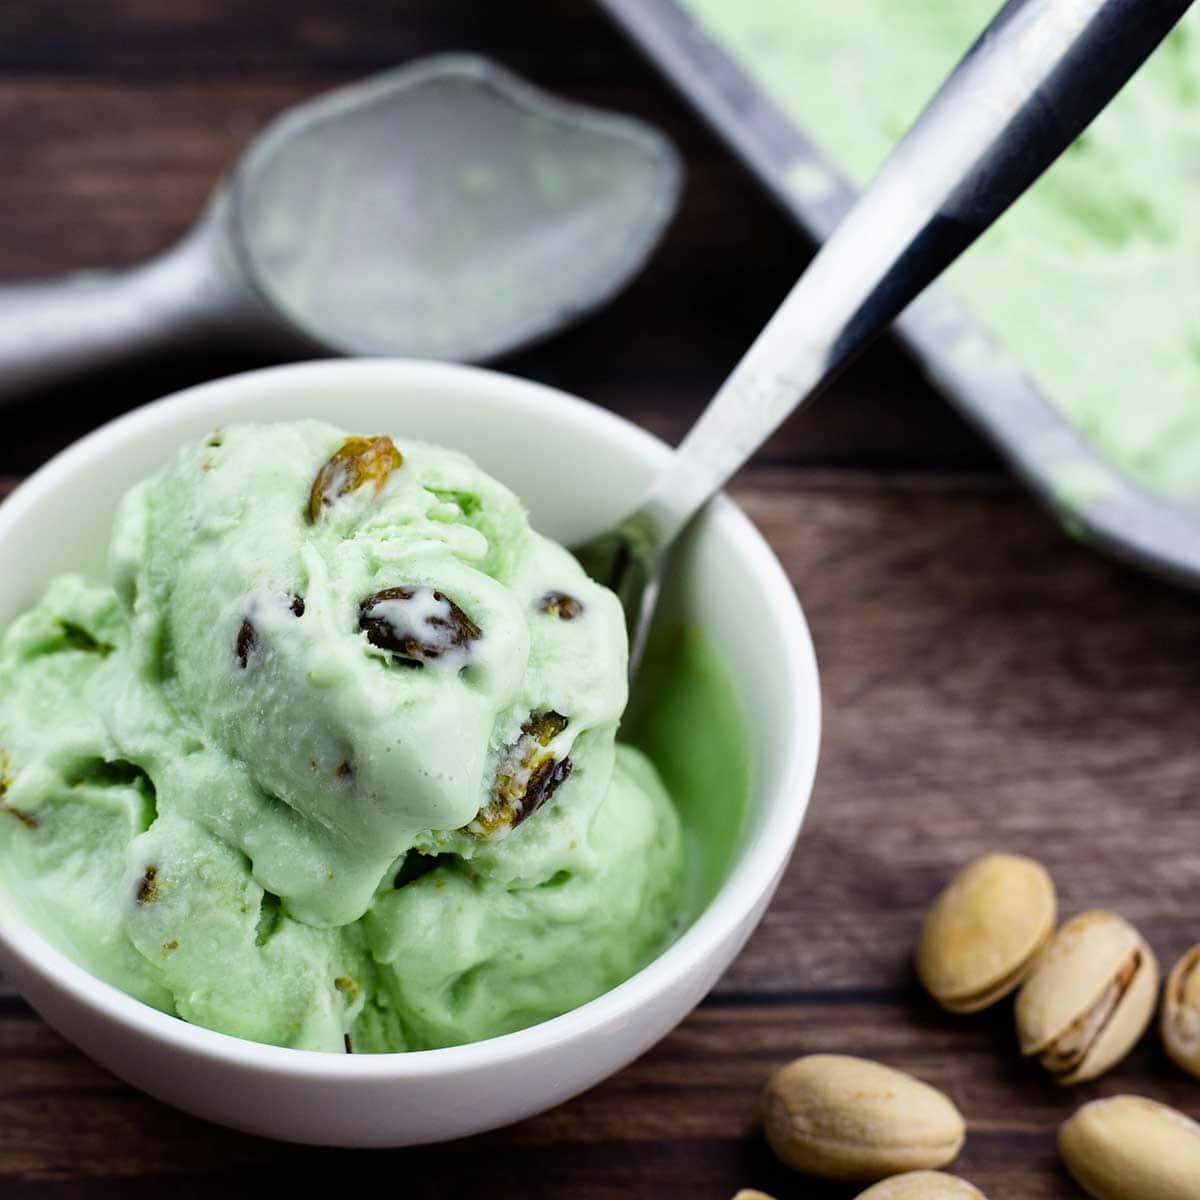 How To Make Homemade Pistachio Ice Cream Without An Ice Cream Maker